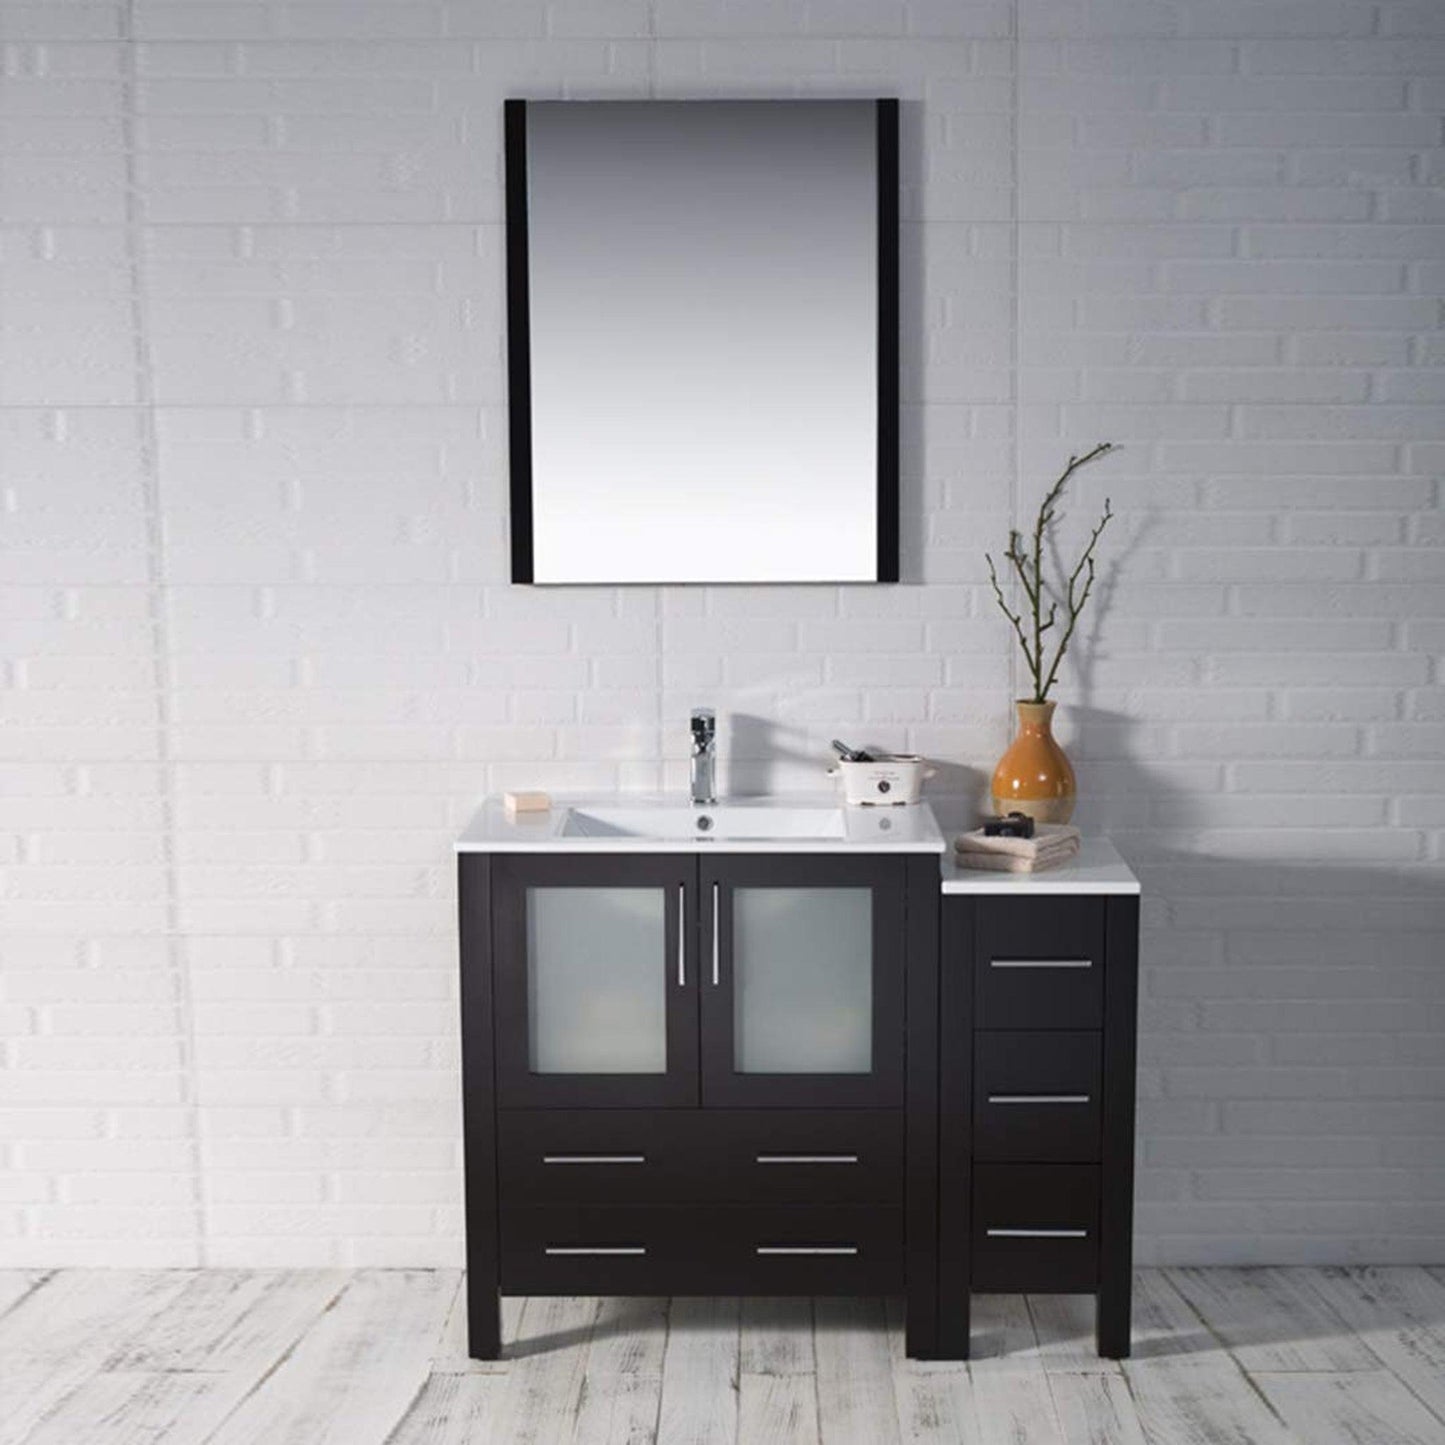 Blossom Sydney 42" Espresso Freestanding Vanity Set With Ceramic Top and Integrated Single Sink, Mirror and Side Cabinet